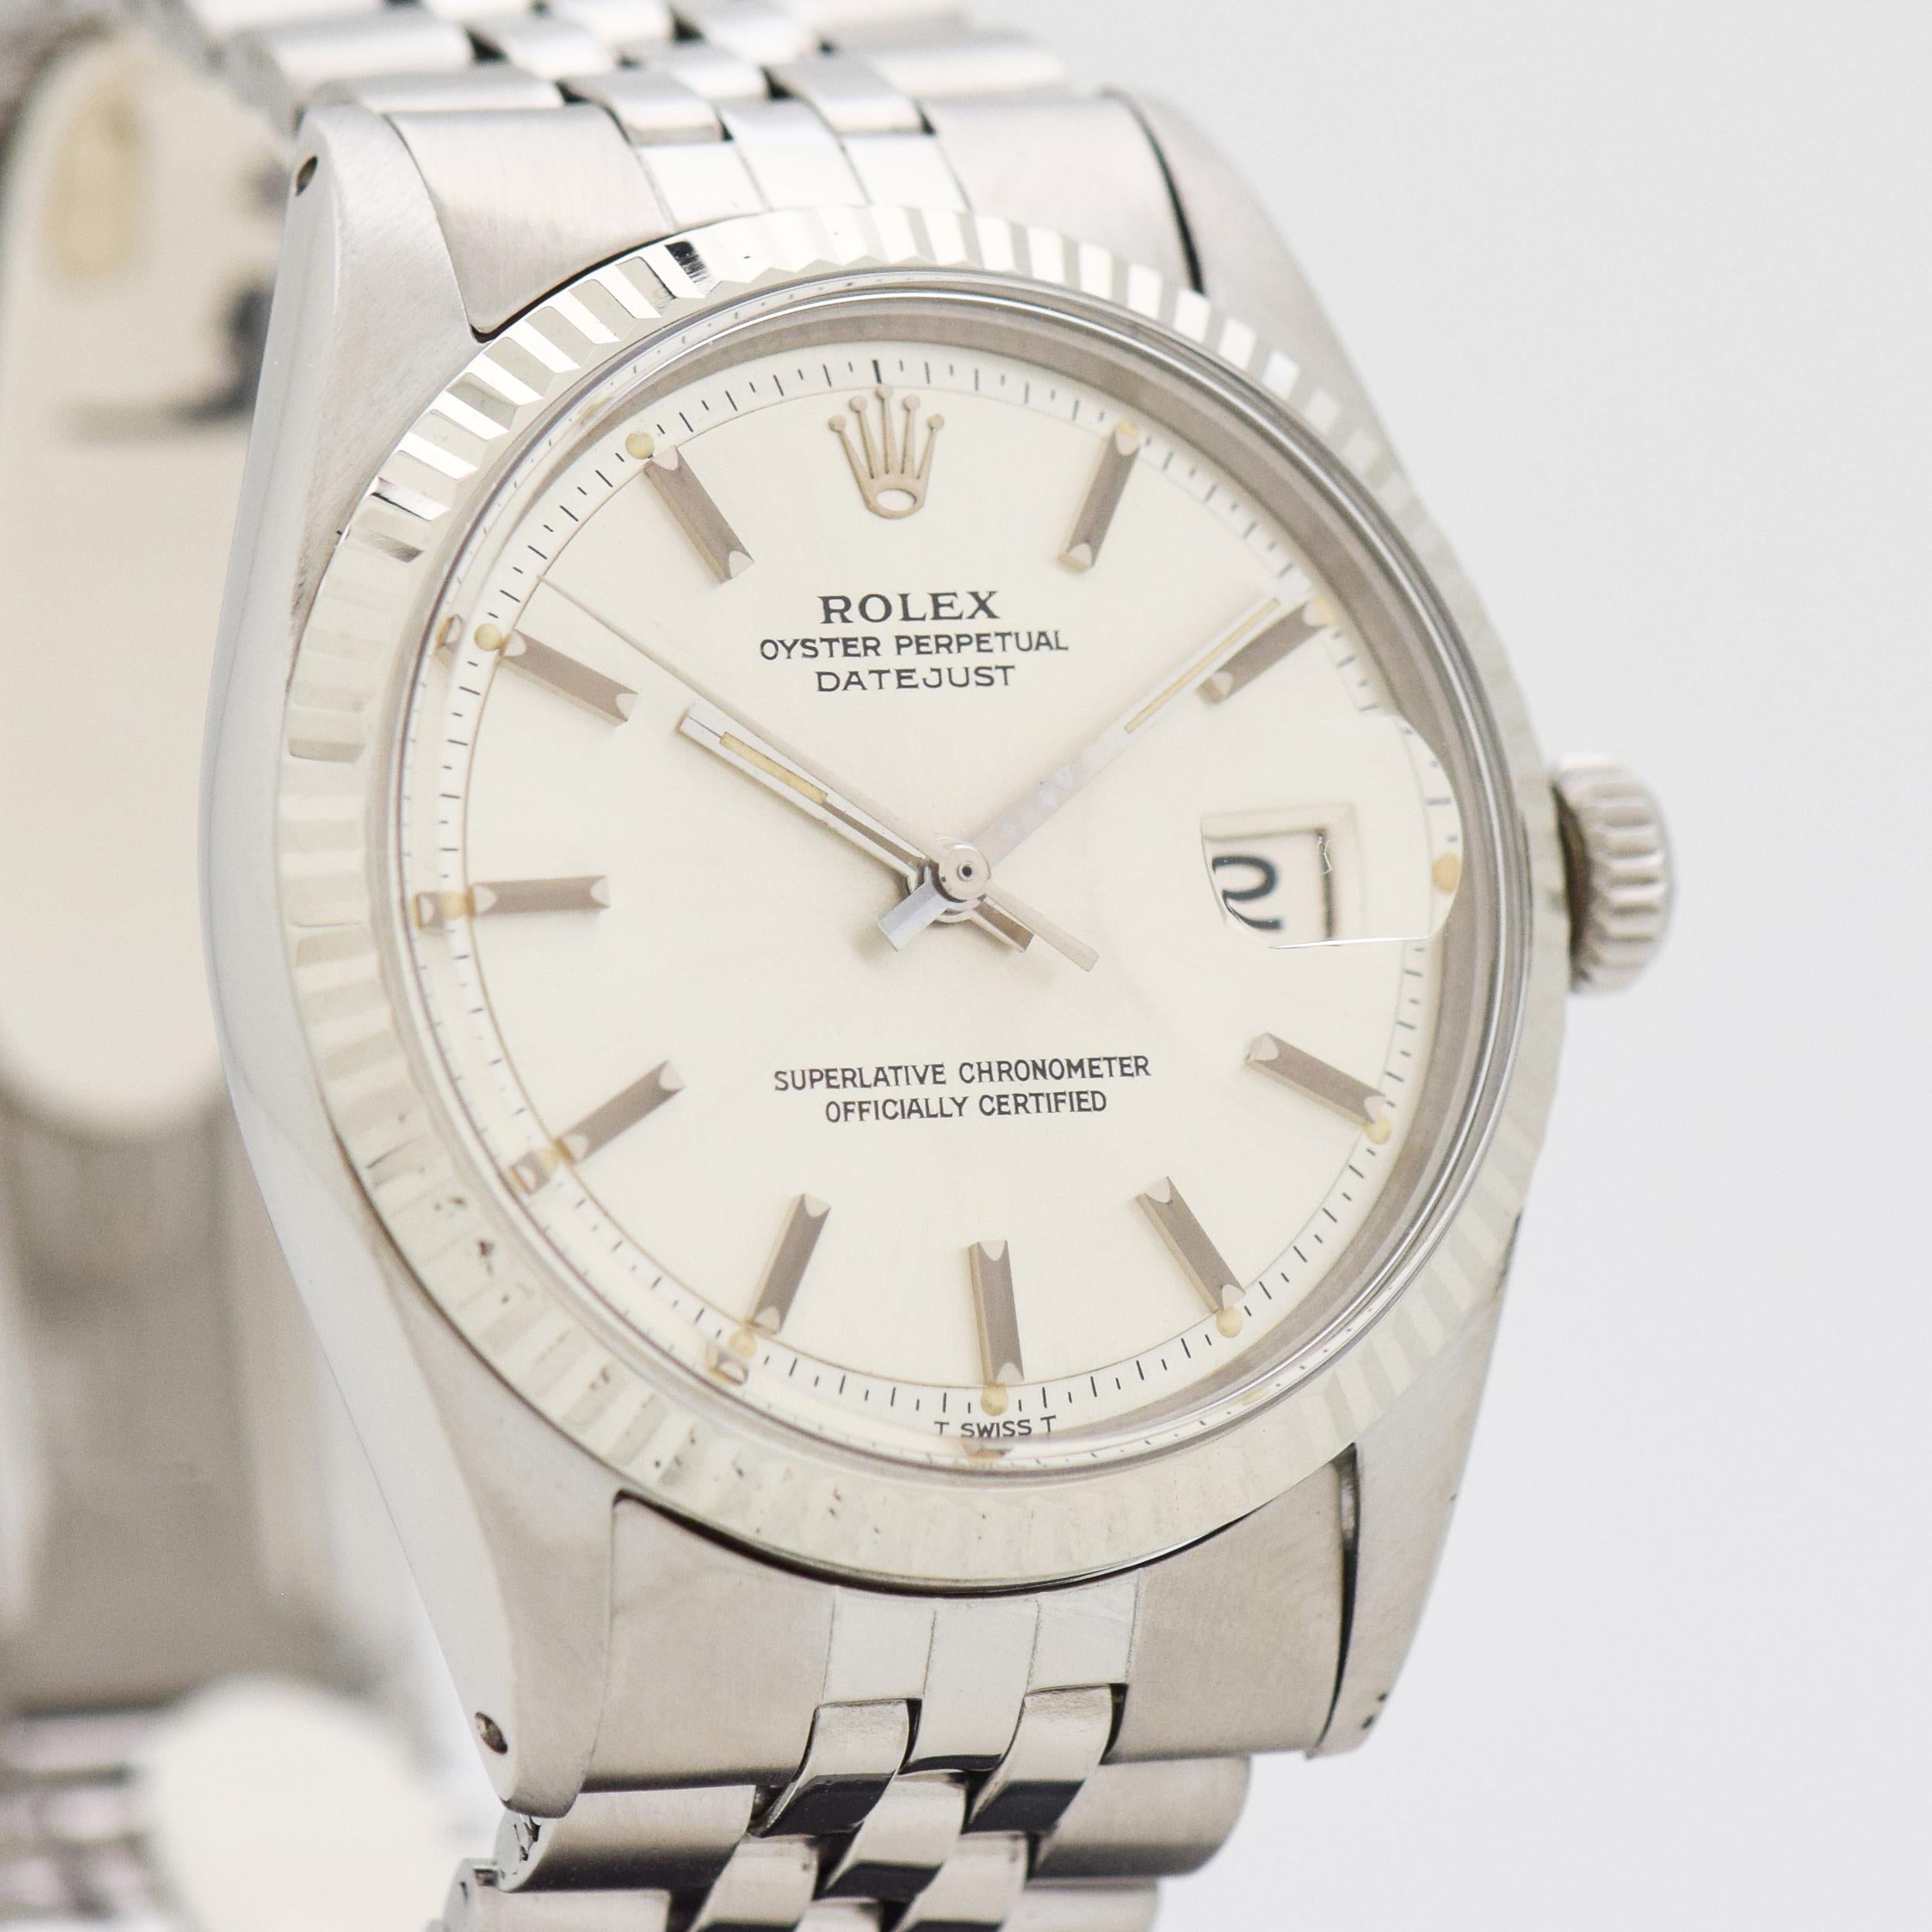 1970 Vintage Rolex Datejust Reference 1601 Watch. 14K White Gold & Stainless Steel case. Fluted bezel. Case size, 36mm wide. Silver dial with applied, silver-colored bar markers. Powered by a 26-jewel, automatic caliber movement. Equipped with an